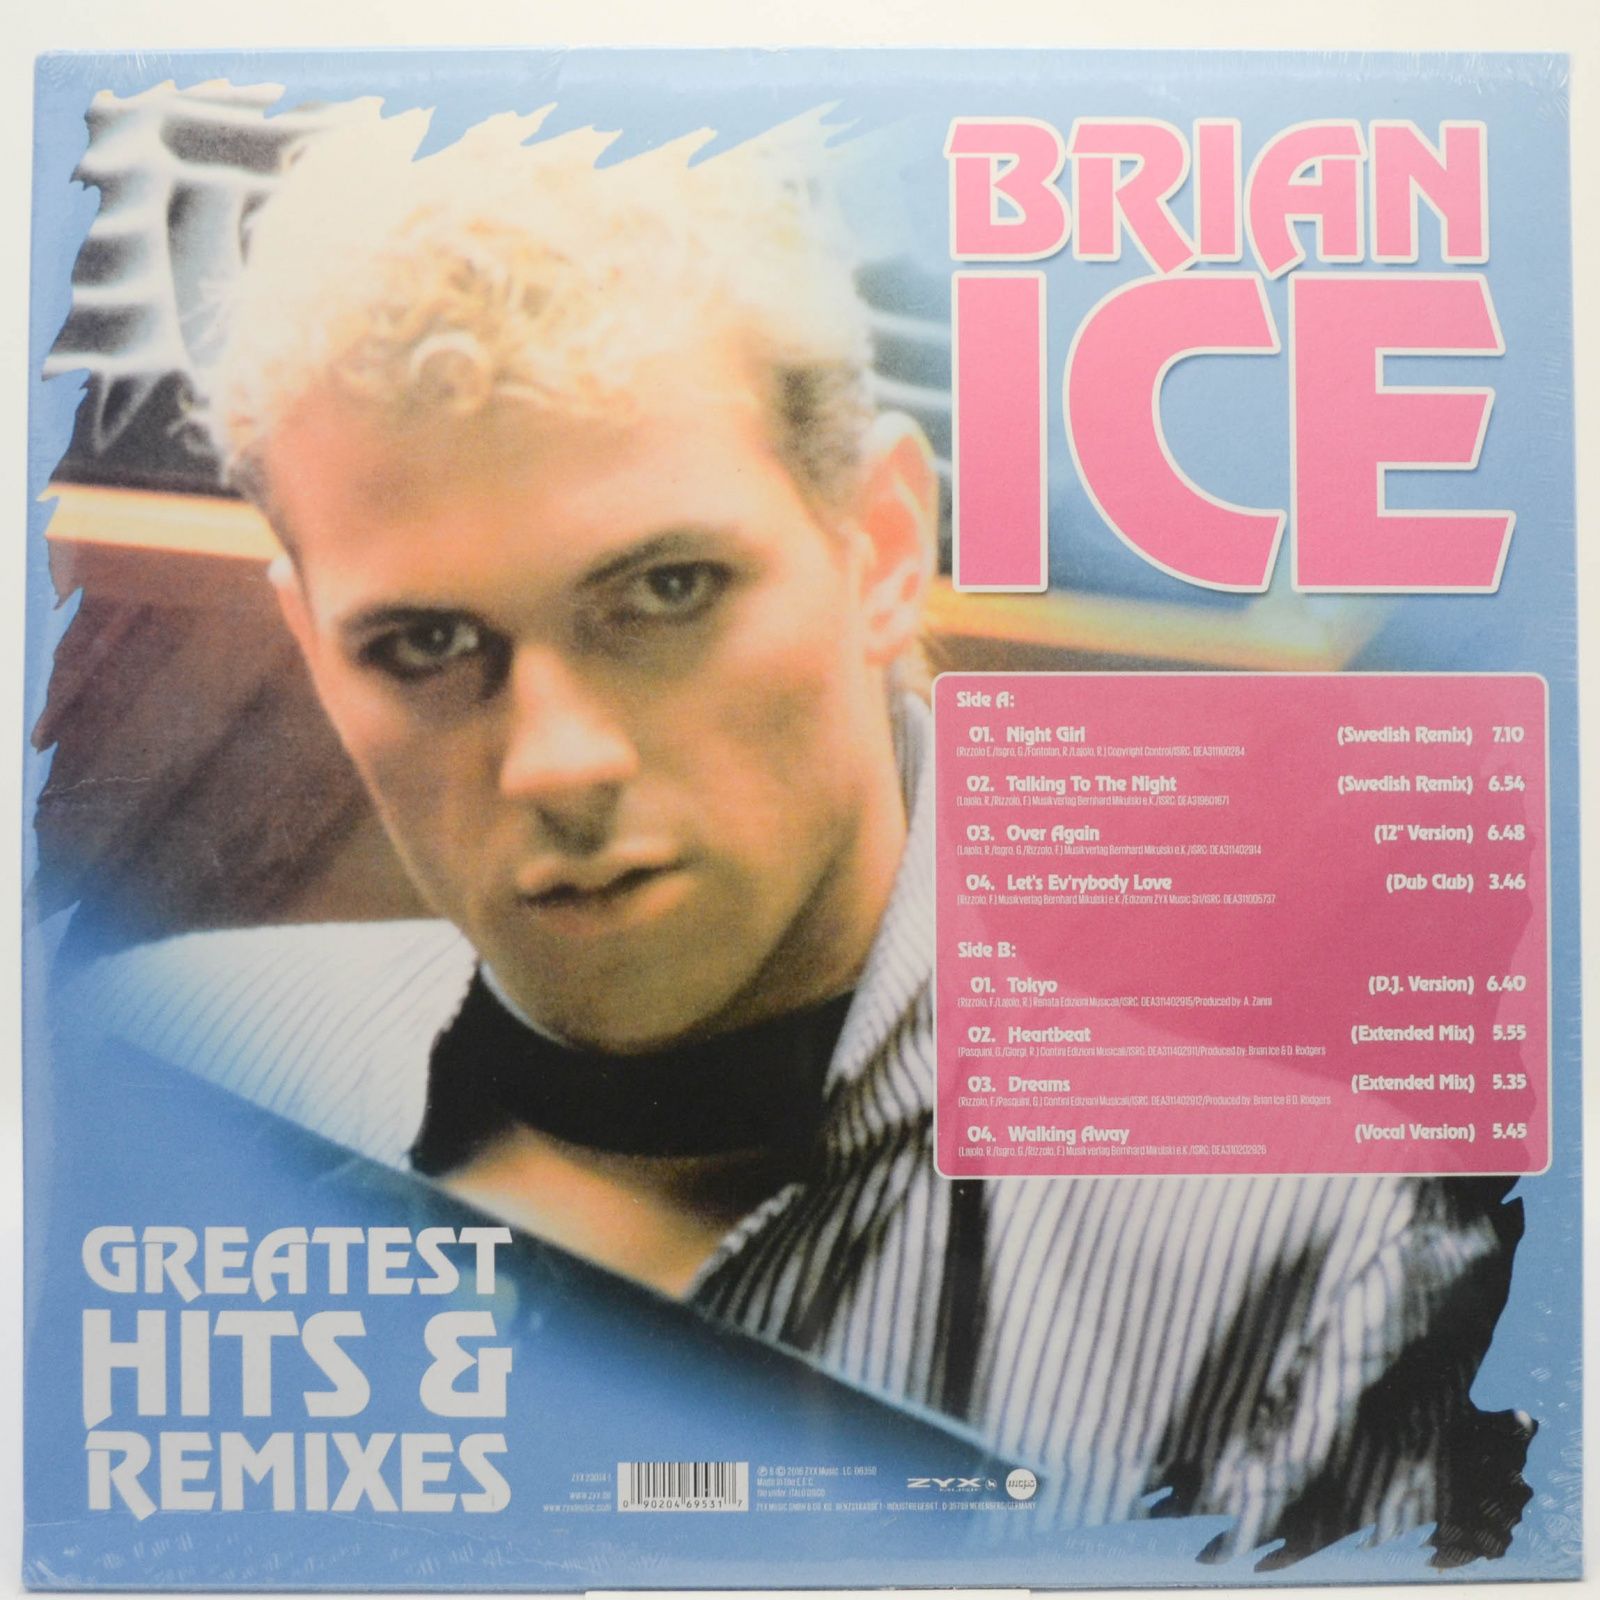 Brian Ice — Greatest Hits & Remixes, 2016